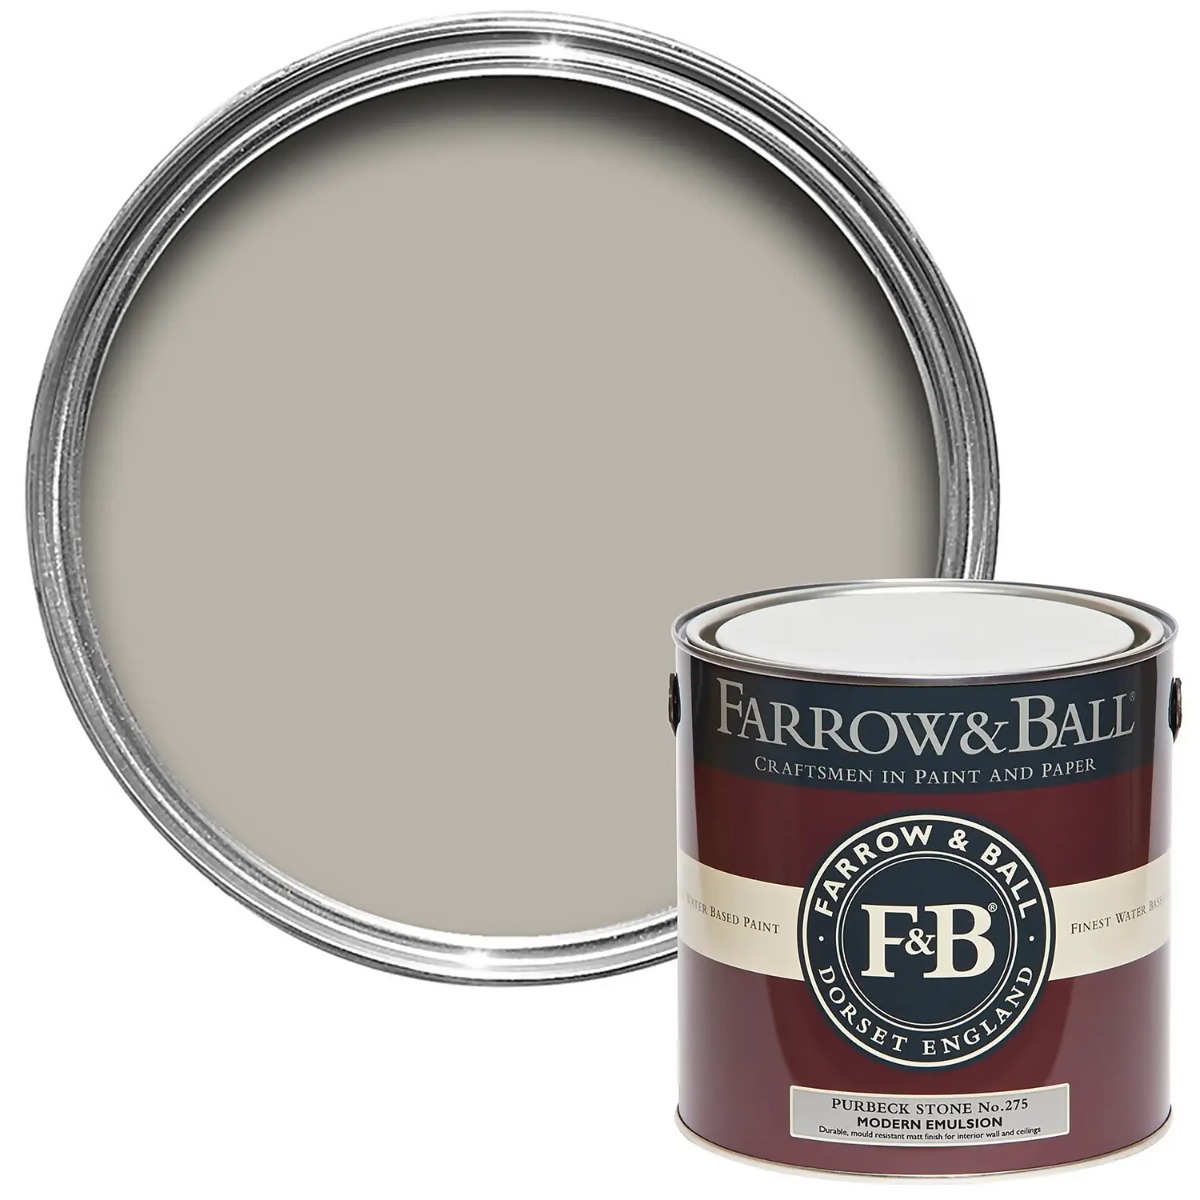 Farrow and Ball Modern Emulsion Purbeck Stone